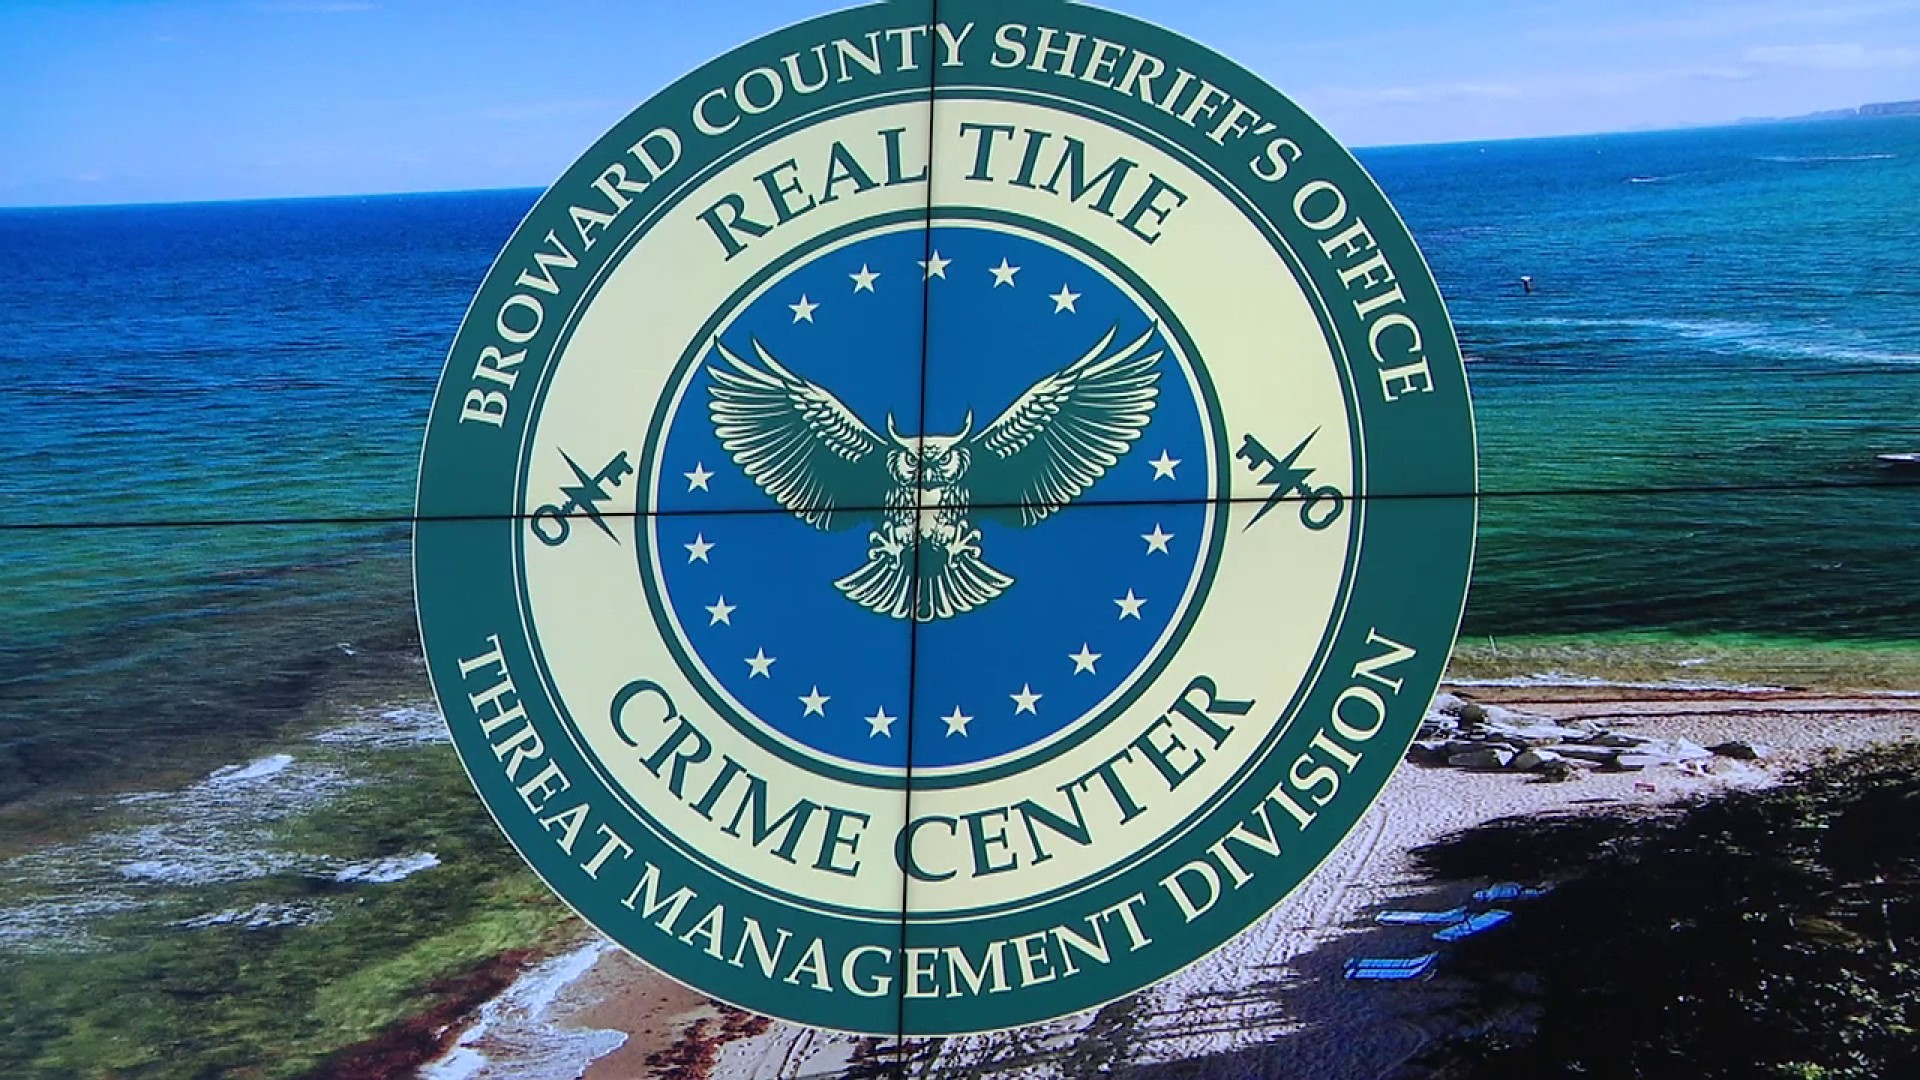 The Quiet Rise of Real-Time Crime Centers